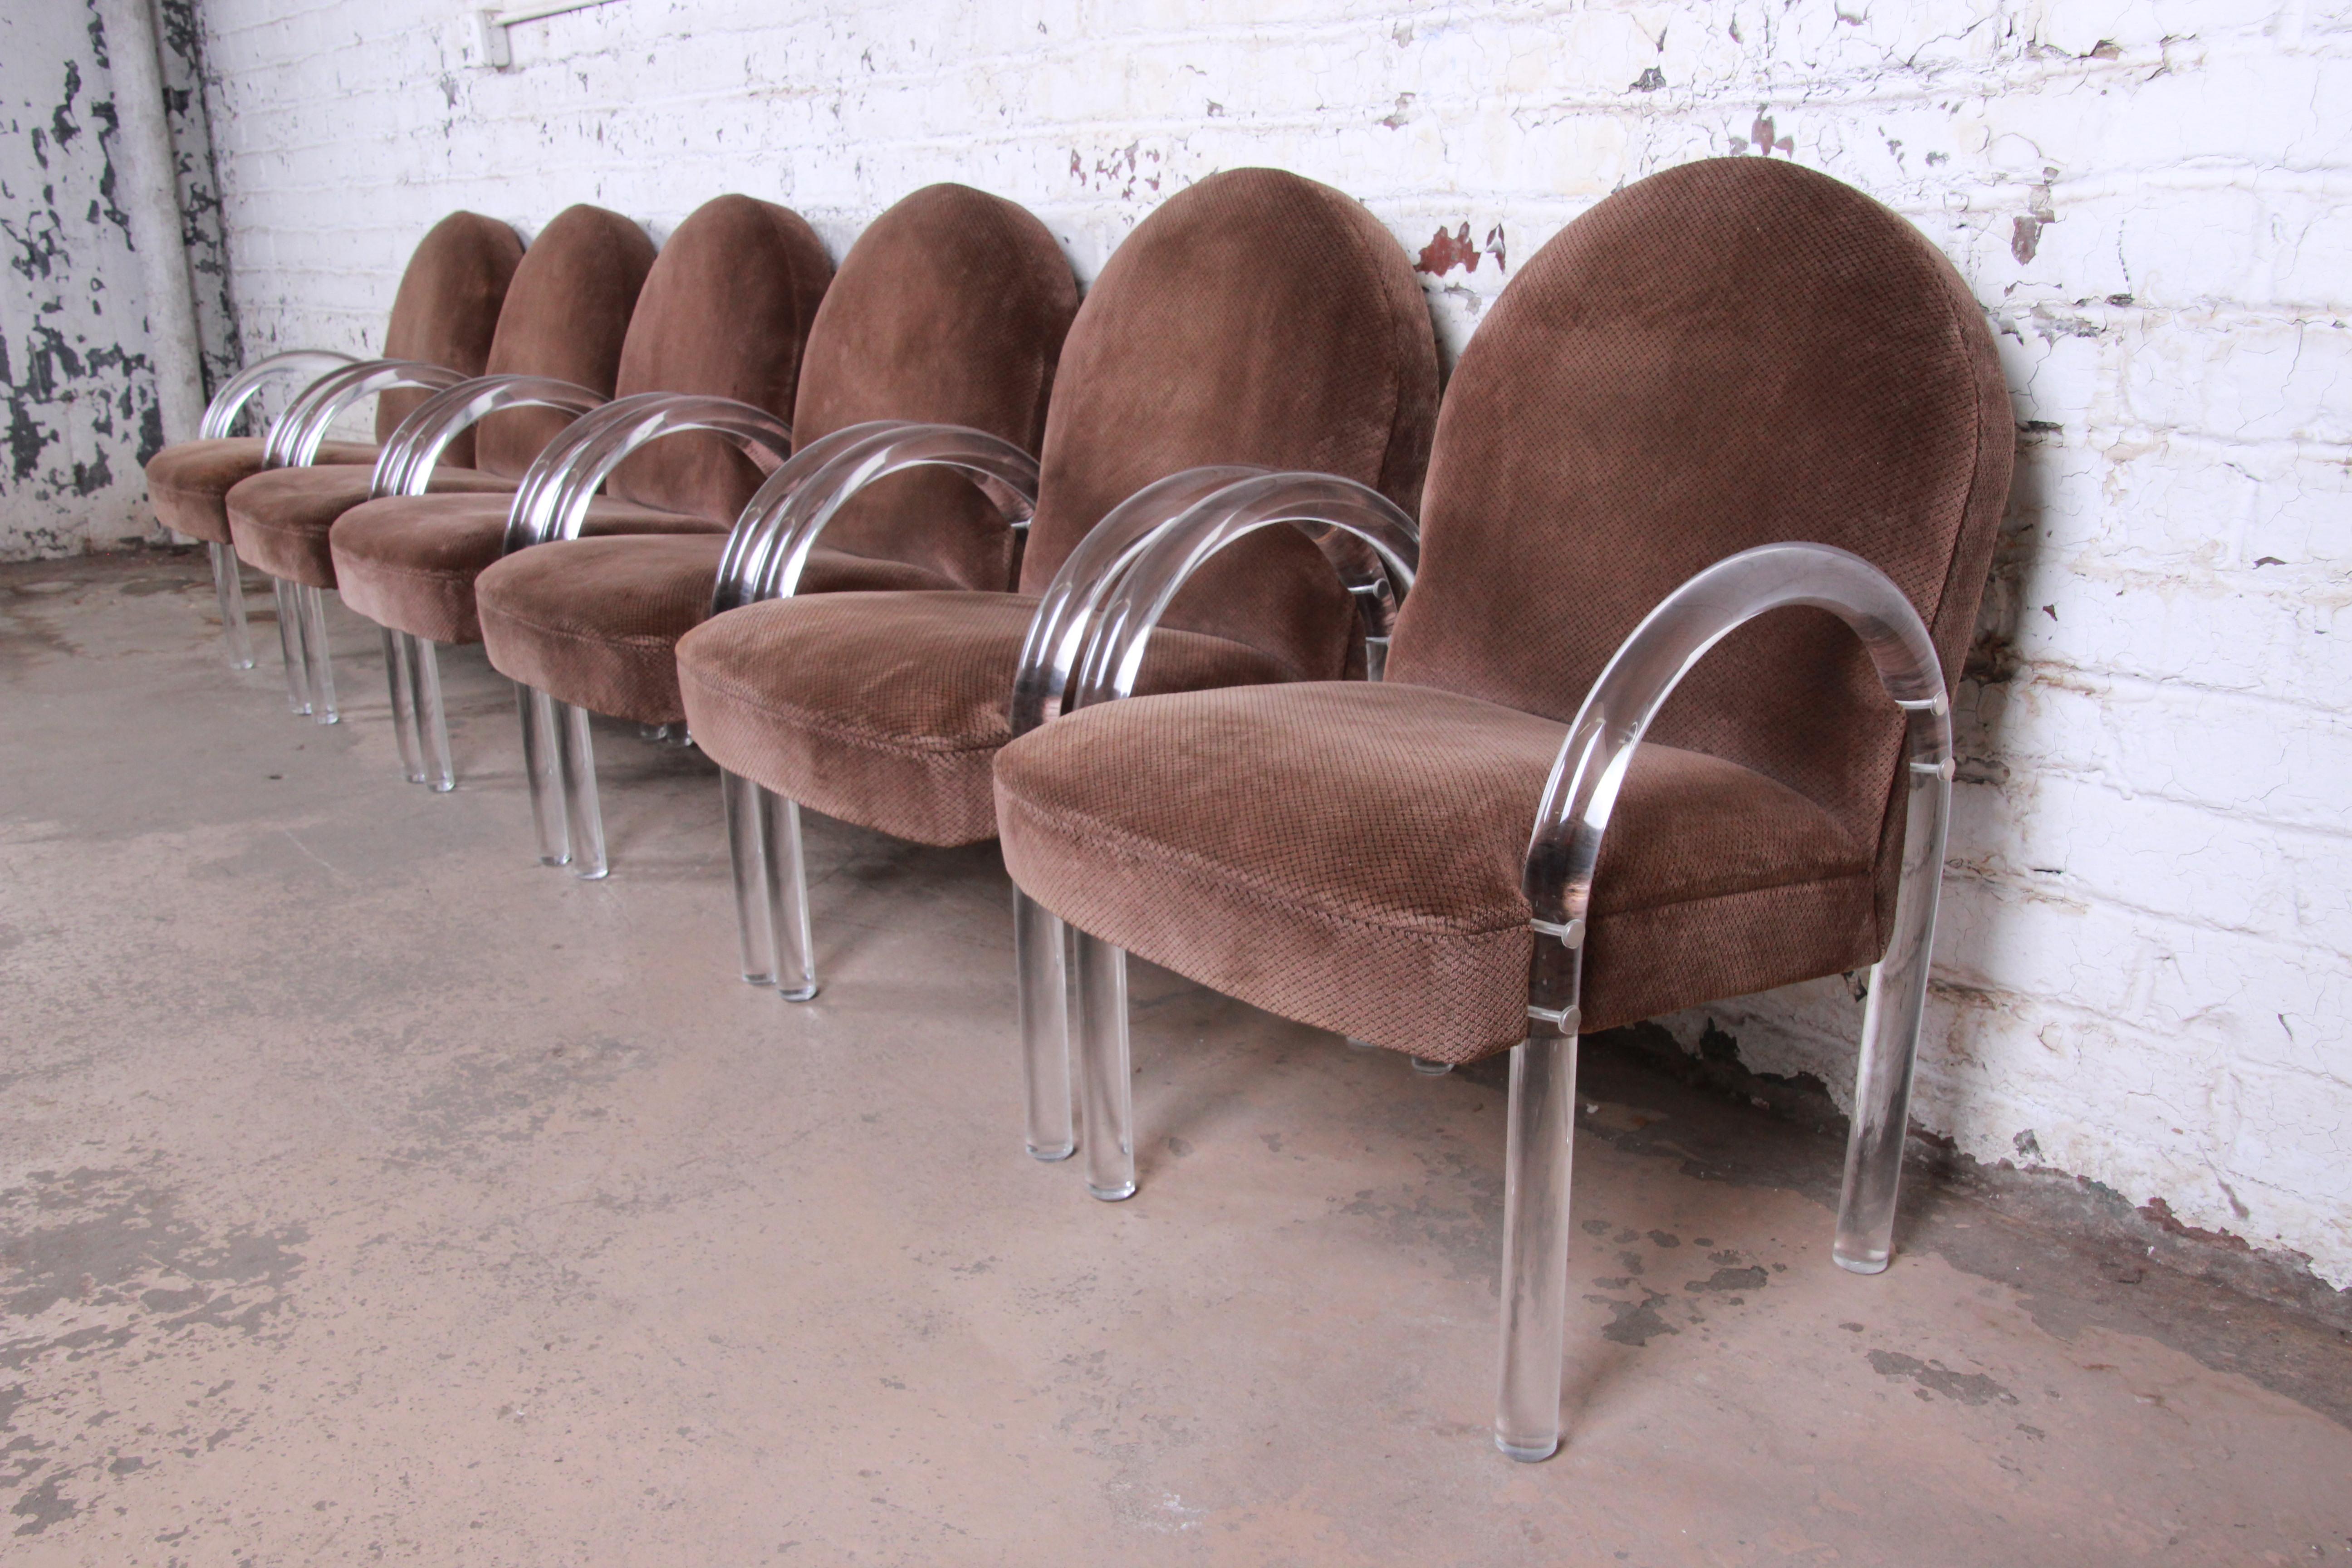 An outstanding set of six modern Art Deco or Hollywood Regency Lucite waterfall club chairs or dining armchairs

By The Pace Collection

USA, 1970s

Solid curved Lucite arms, with brass fittings and original brown microfiber